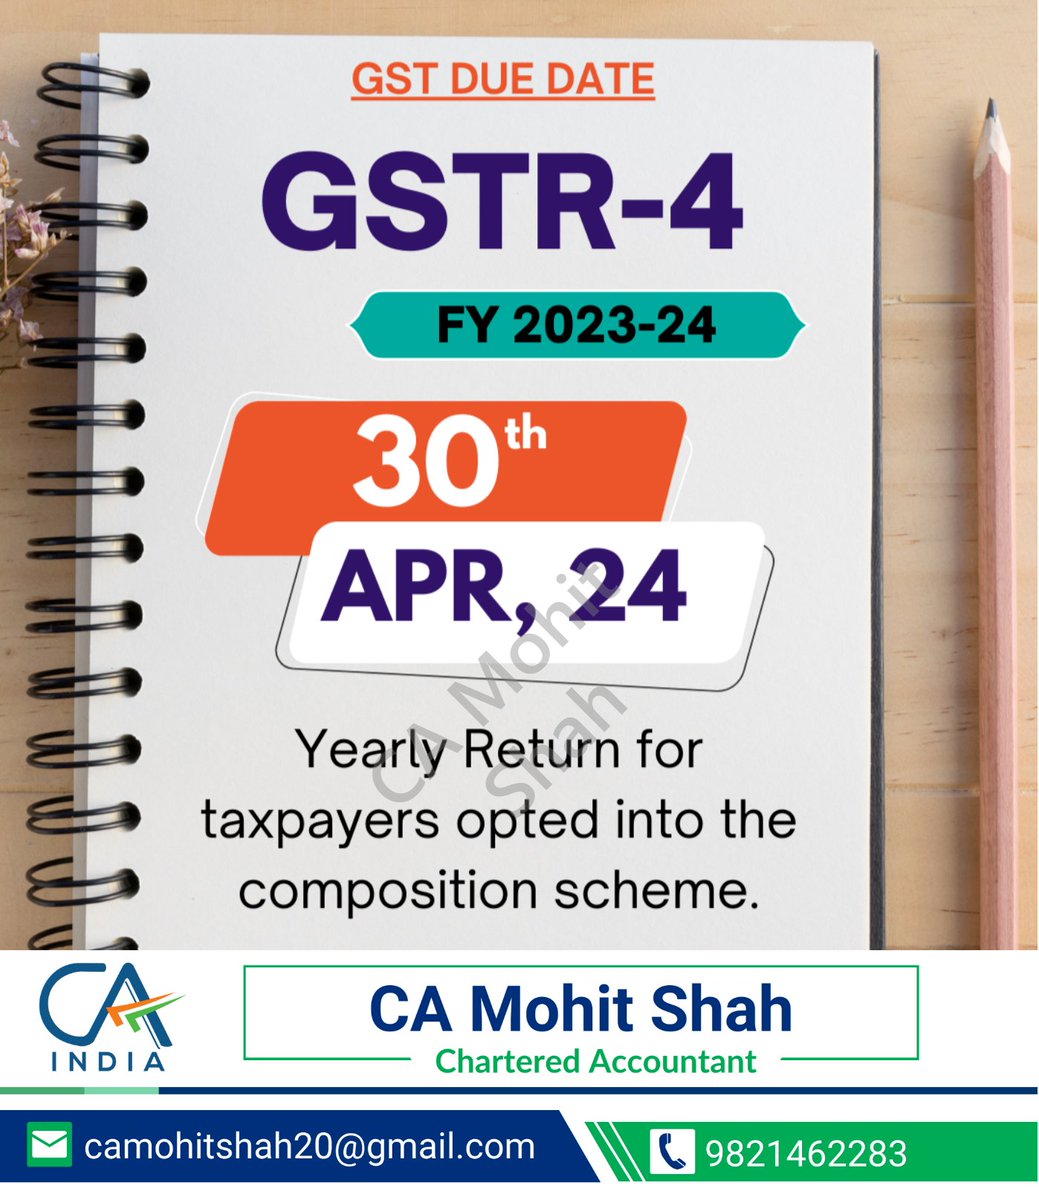 Yearly return for taxpayers opted into the composition scheme is due on 30th April,2024. Ensure timely filing of GSTR-4 to comply with GST regulations.   

 #GSTR4 #CompositionScheme #GSTReturns #TaxFiling #SmallBusiness #SMEs #TaxCompliance #GSTIndia #BusinessTaxation